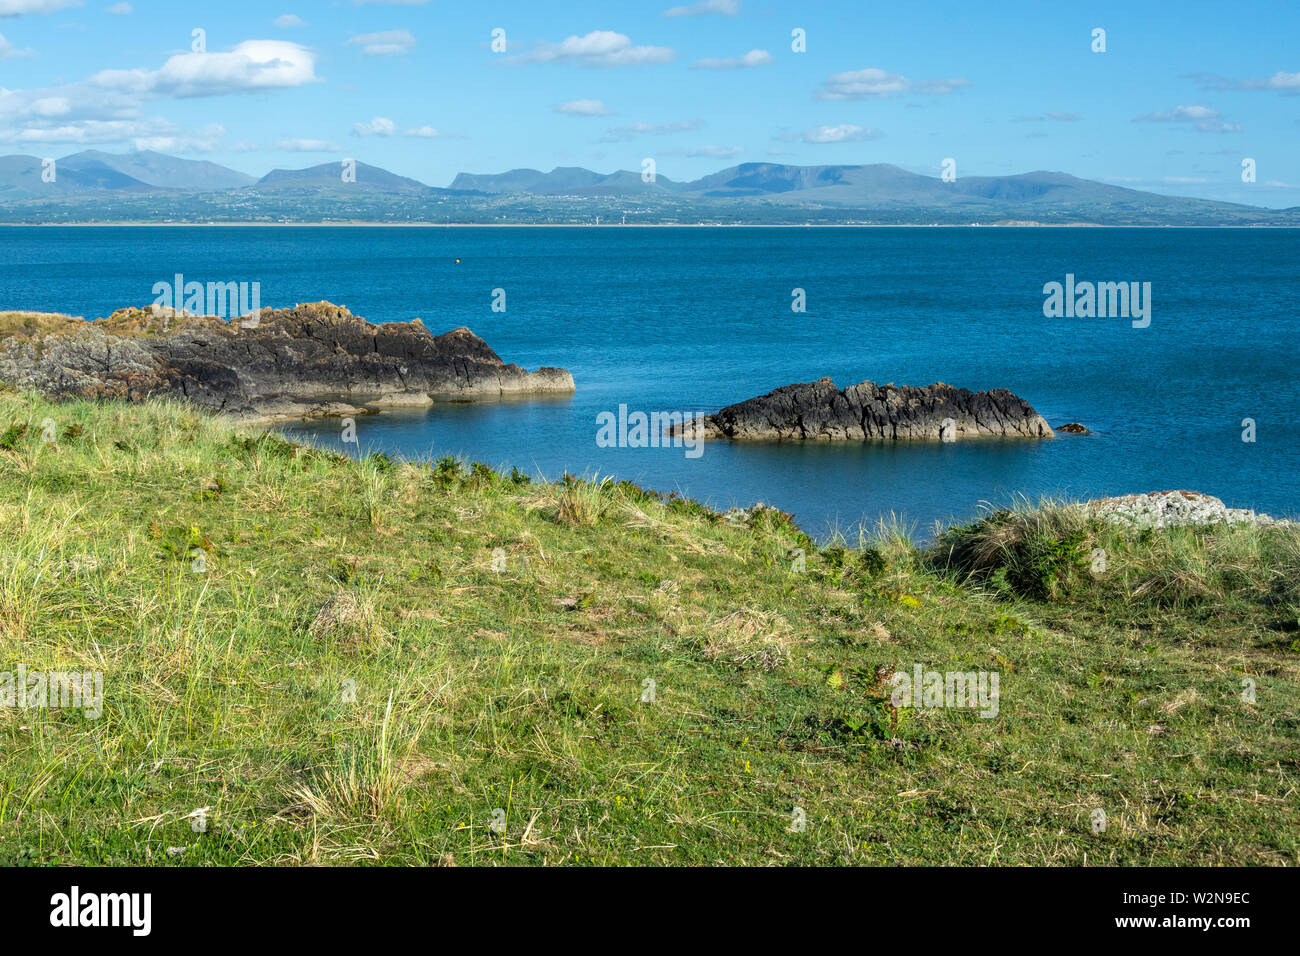 Menai Strait and Snowdonia mountains seen from rocky coast of Anglesey Island - 1 Stock Photo